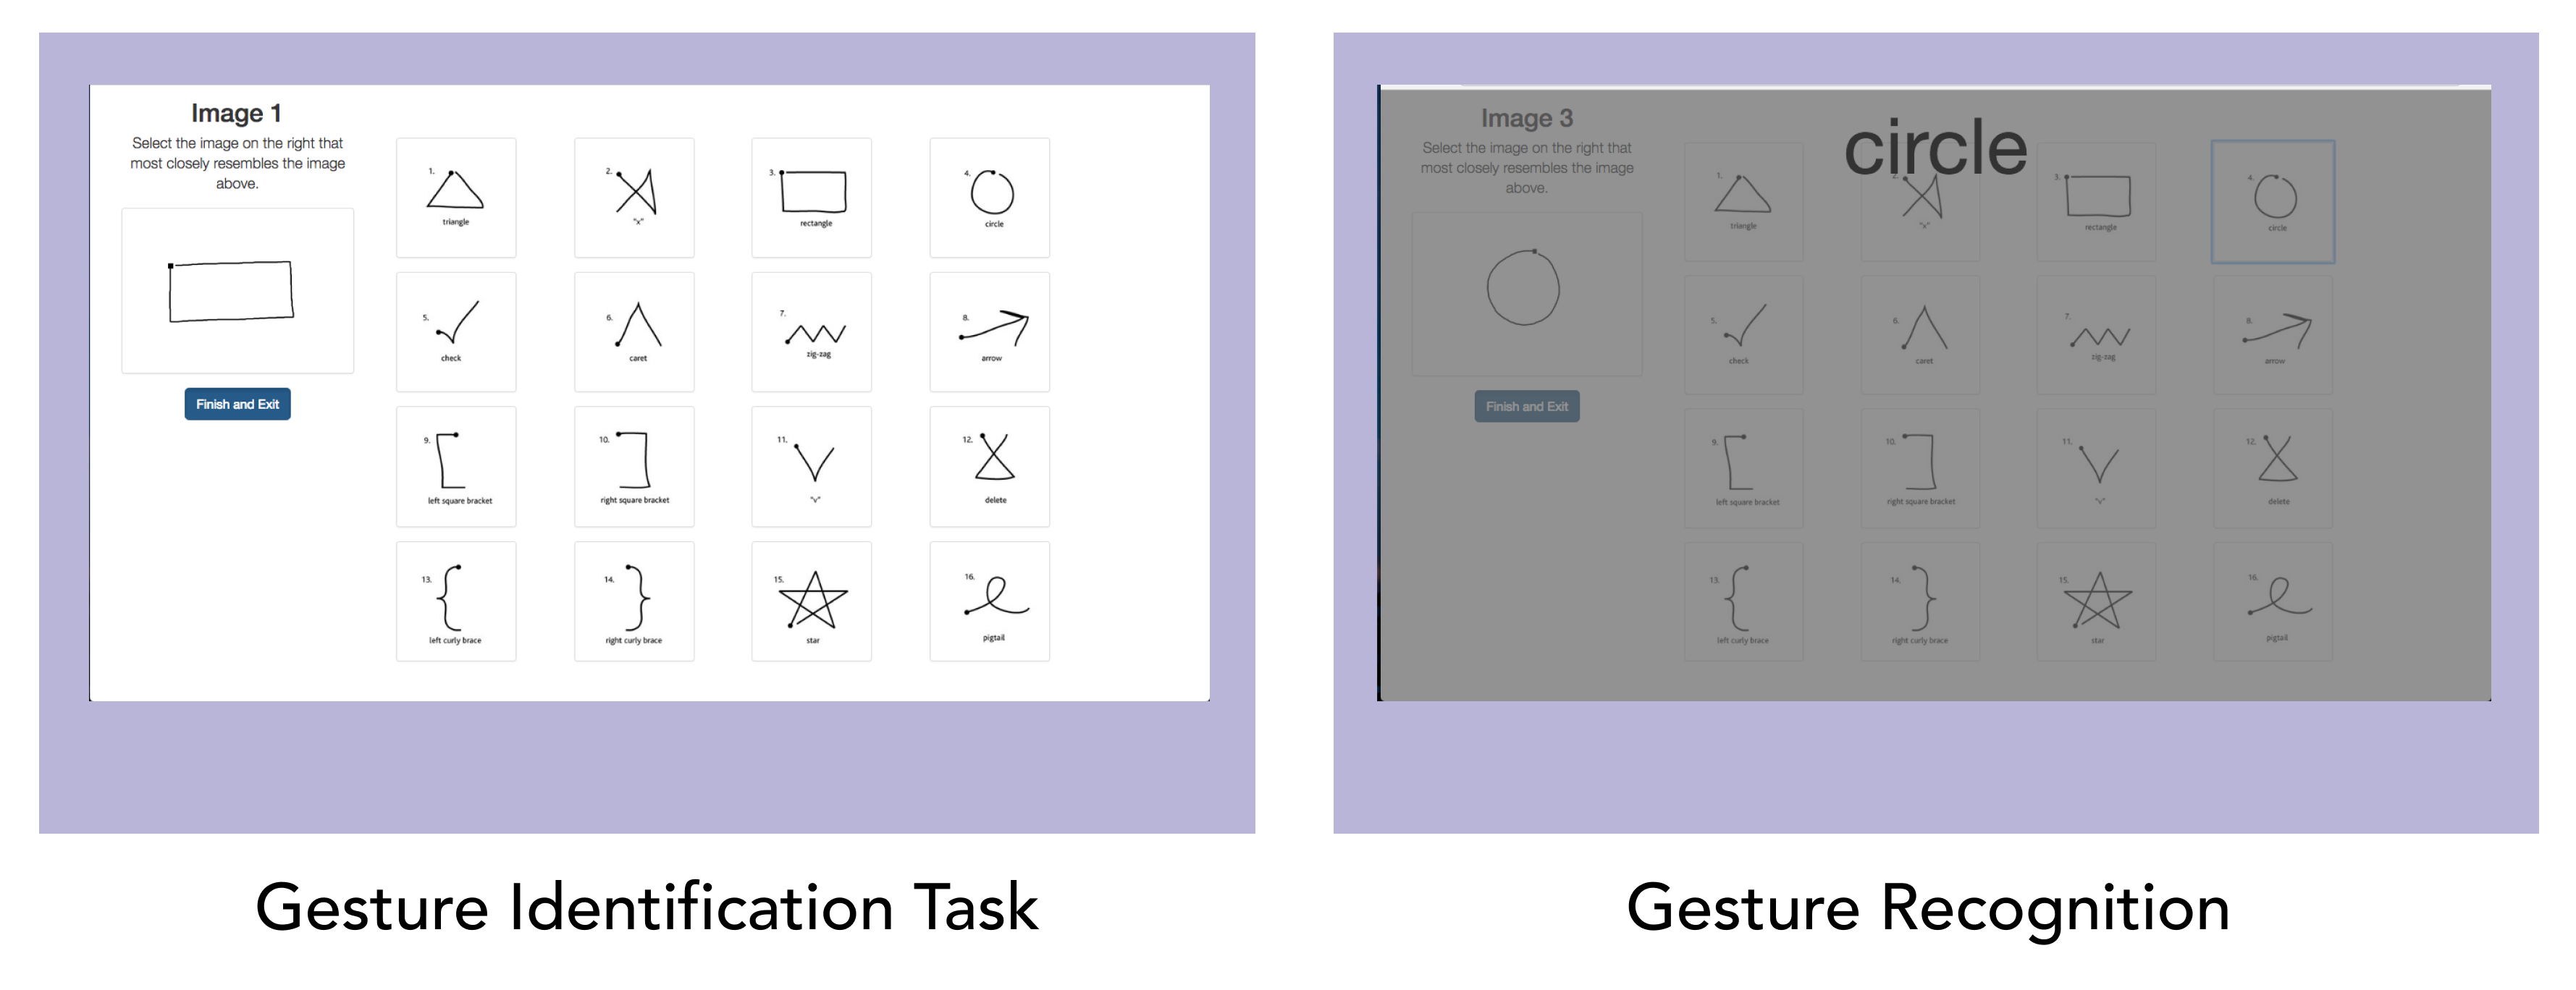 Worker Interface for gesture identification and gesture recognition tasks